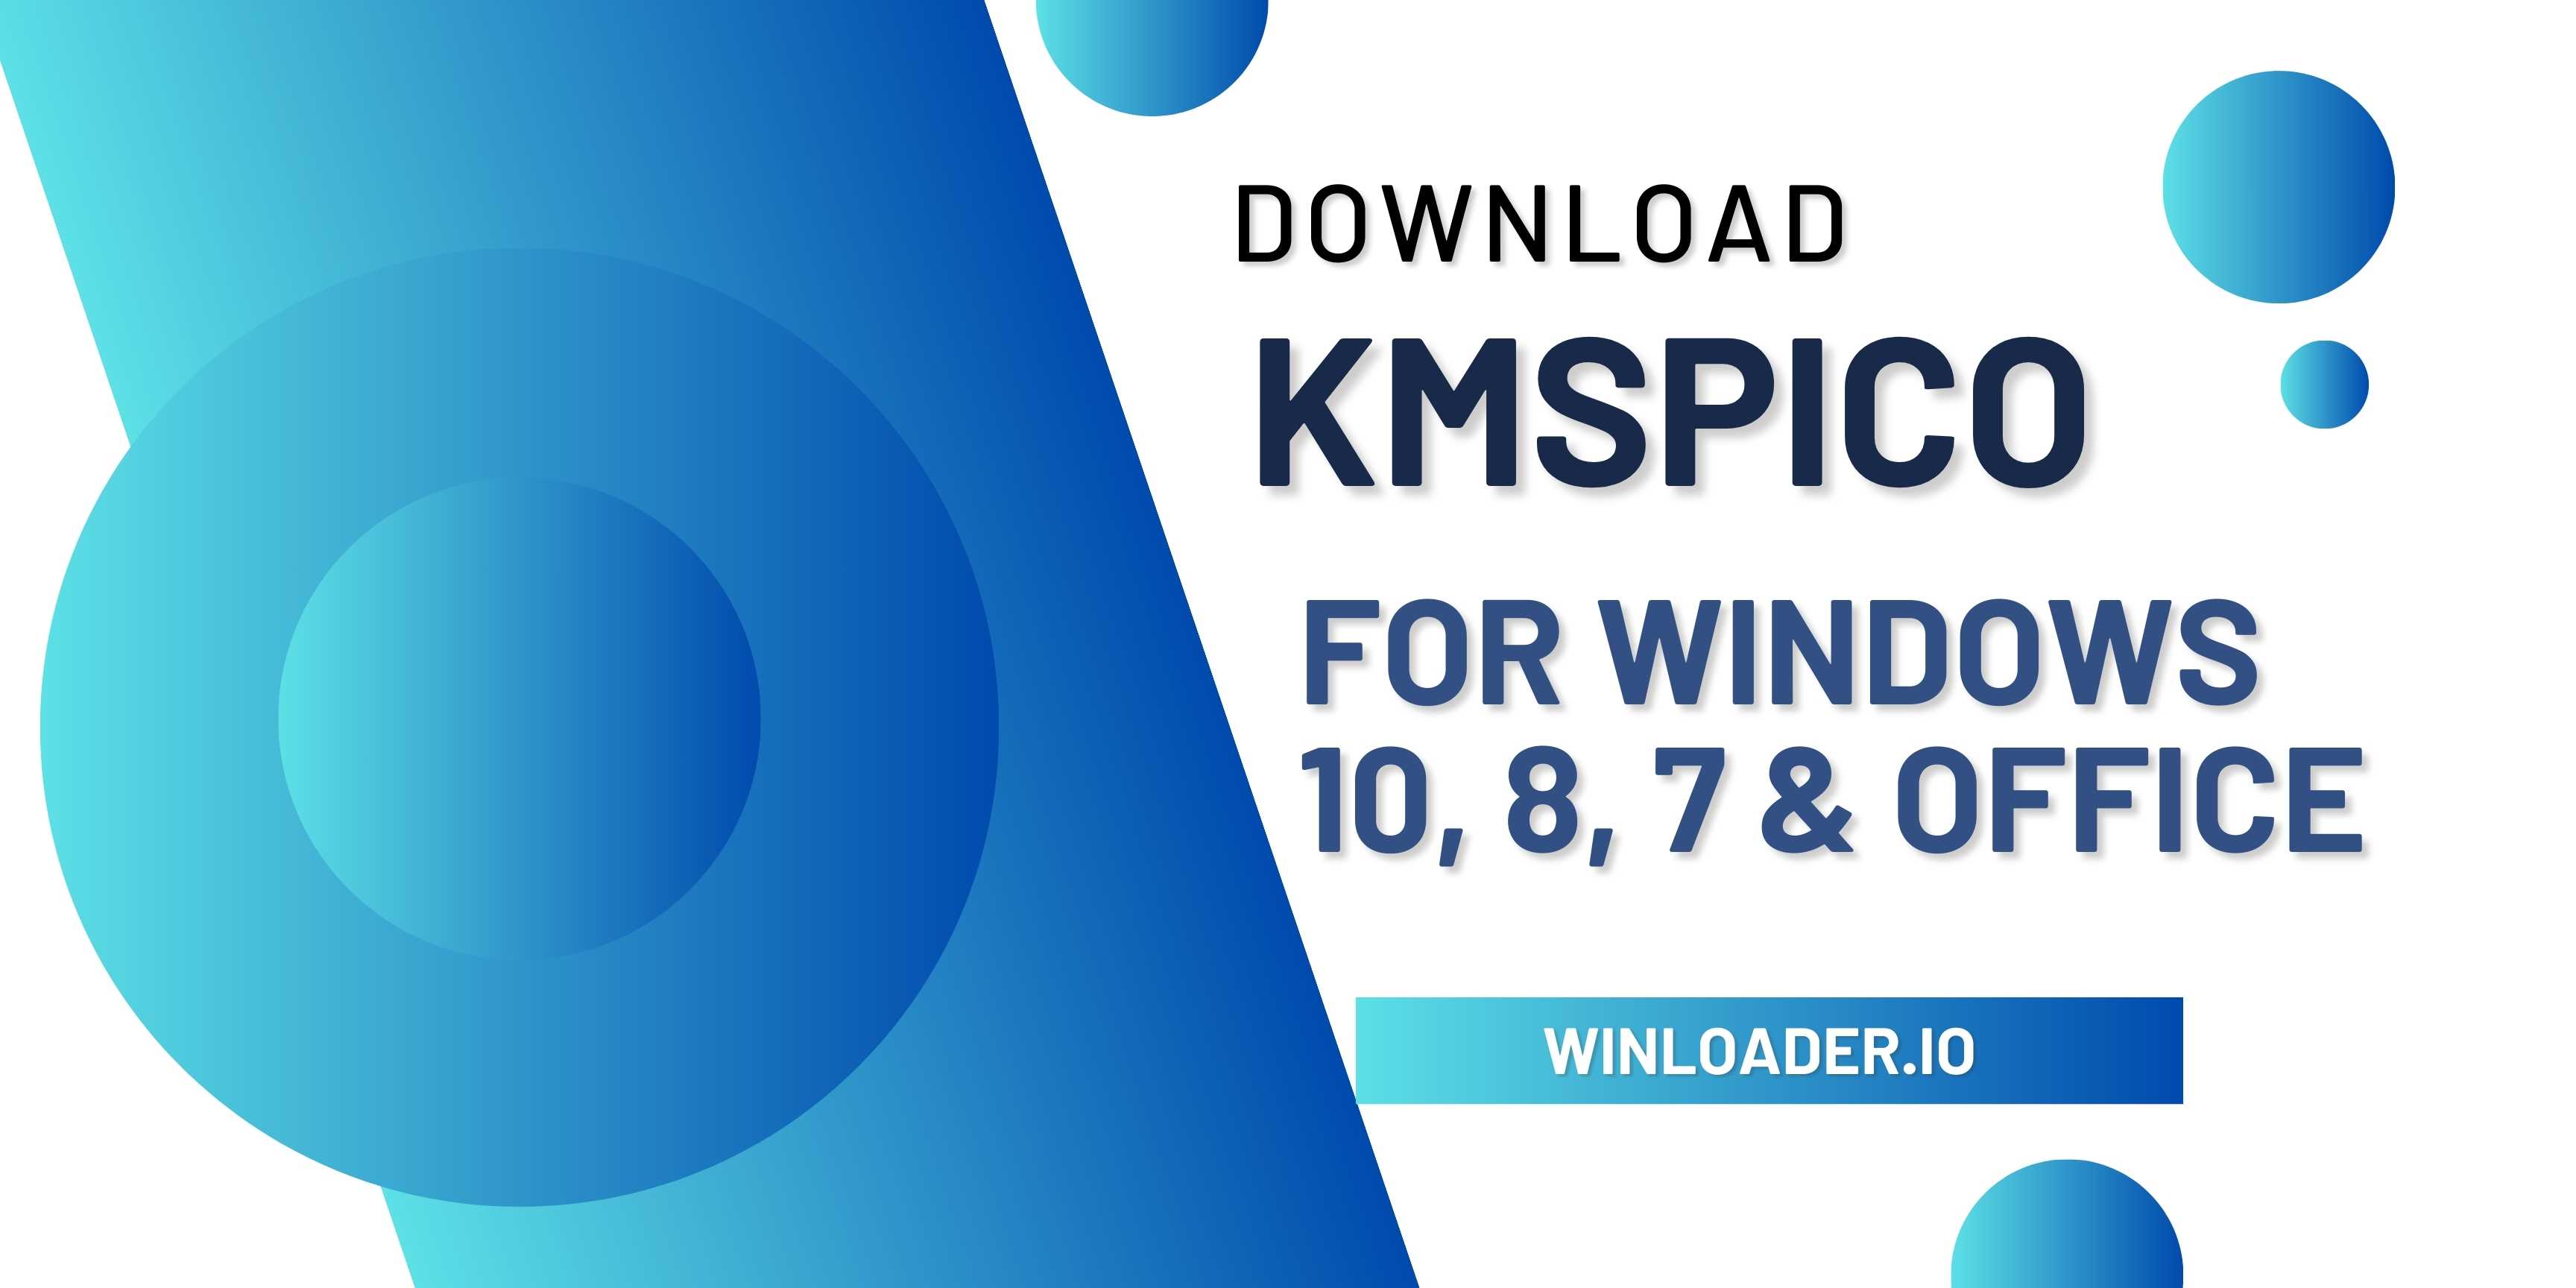 Download KMSpico for Windows 10, 8, 7 & Office